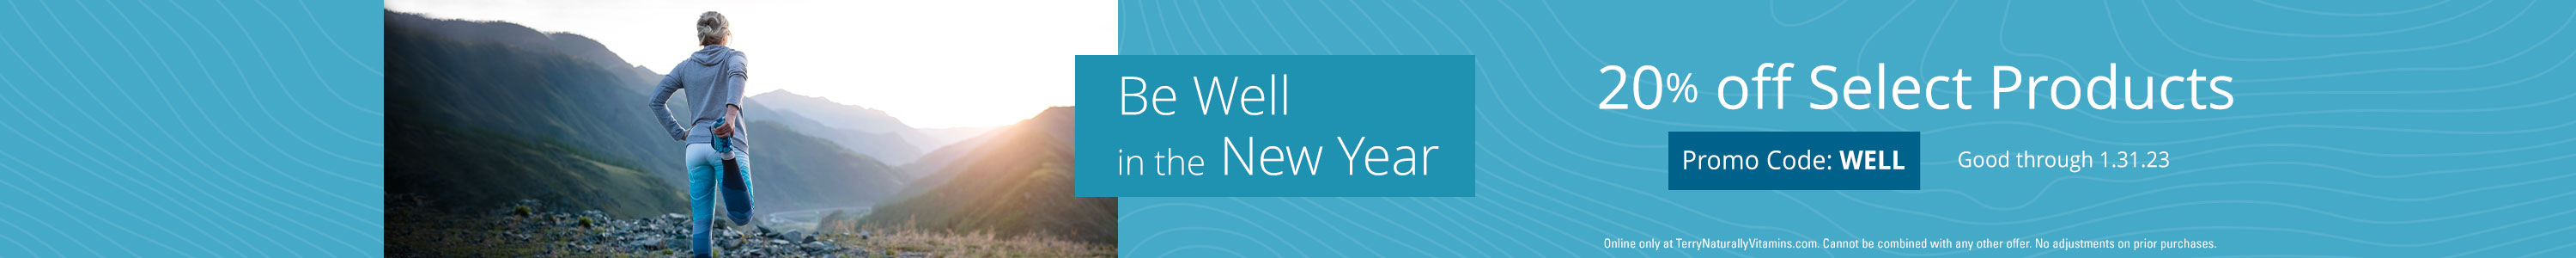 Be Well in the New Year